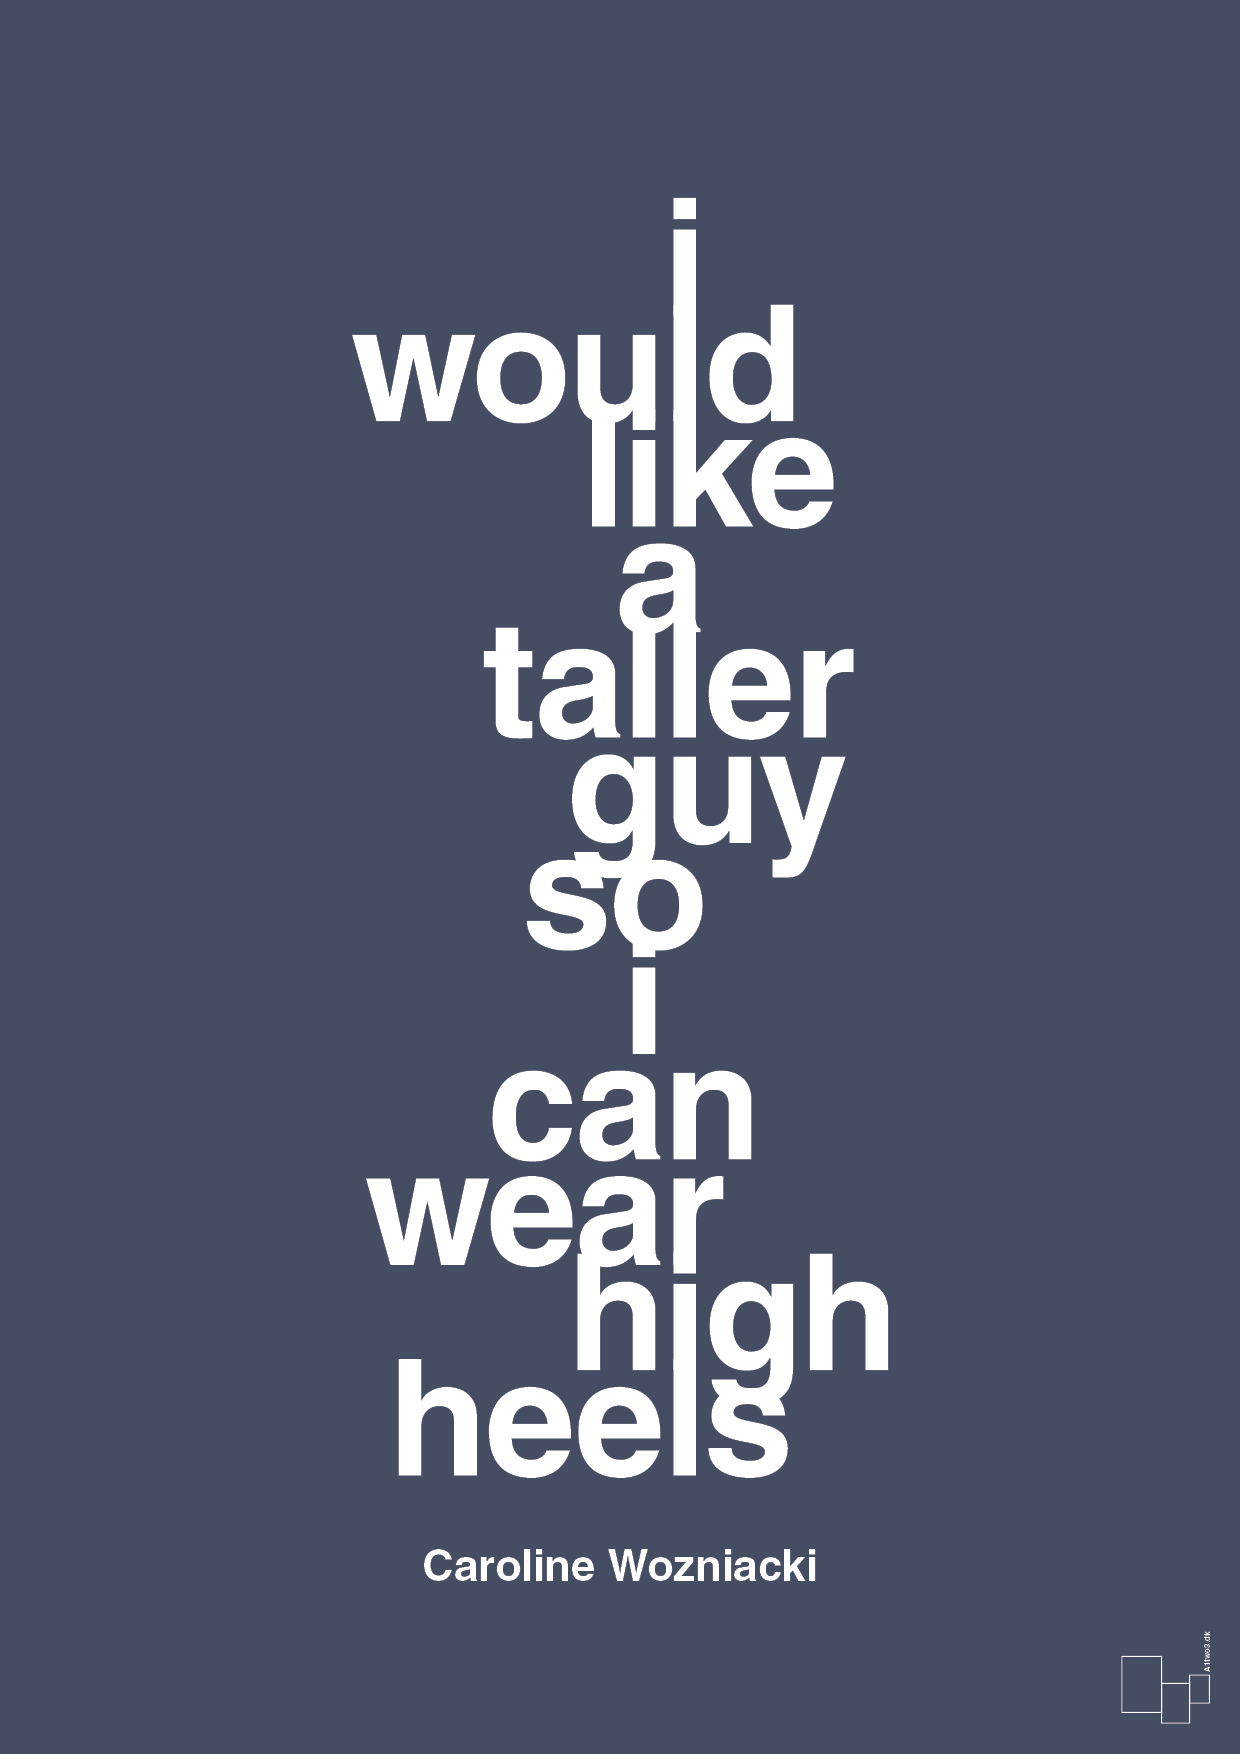 i would like a taller guy so i can wear high heels - Plakat med Citater i Petrol